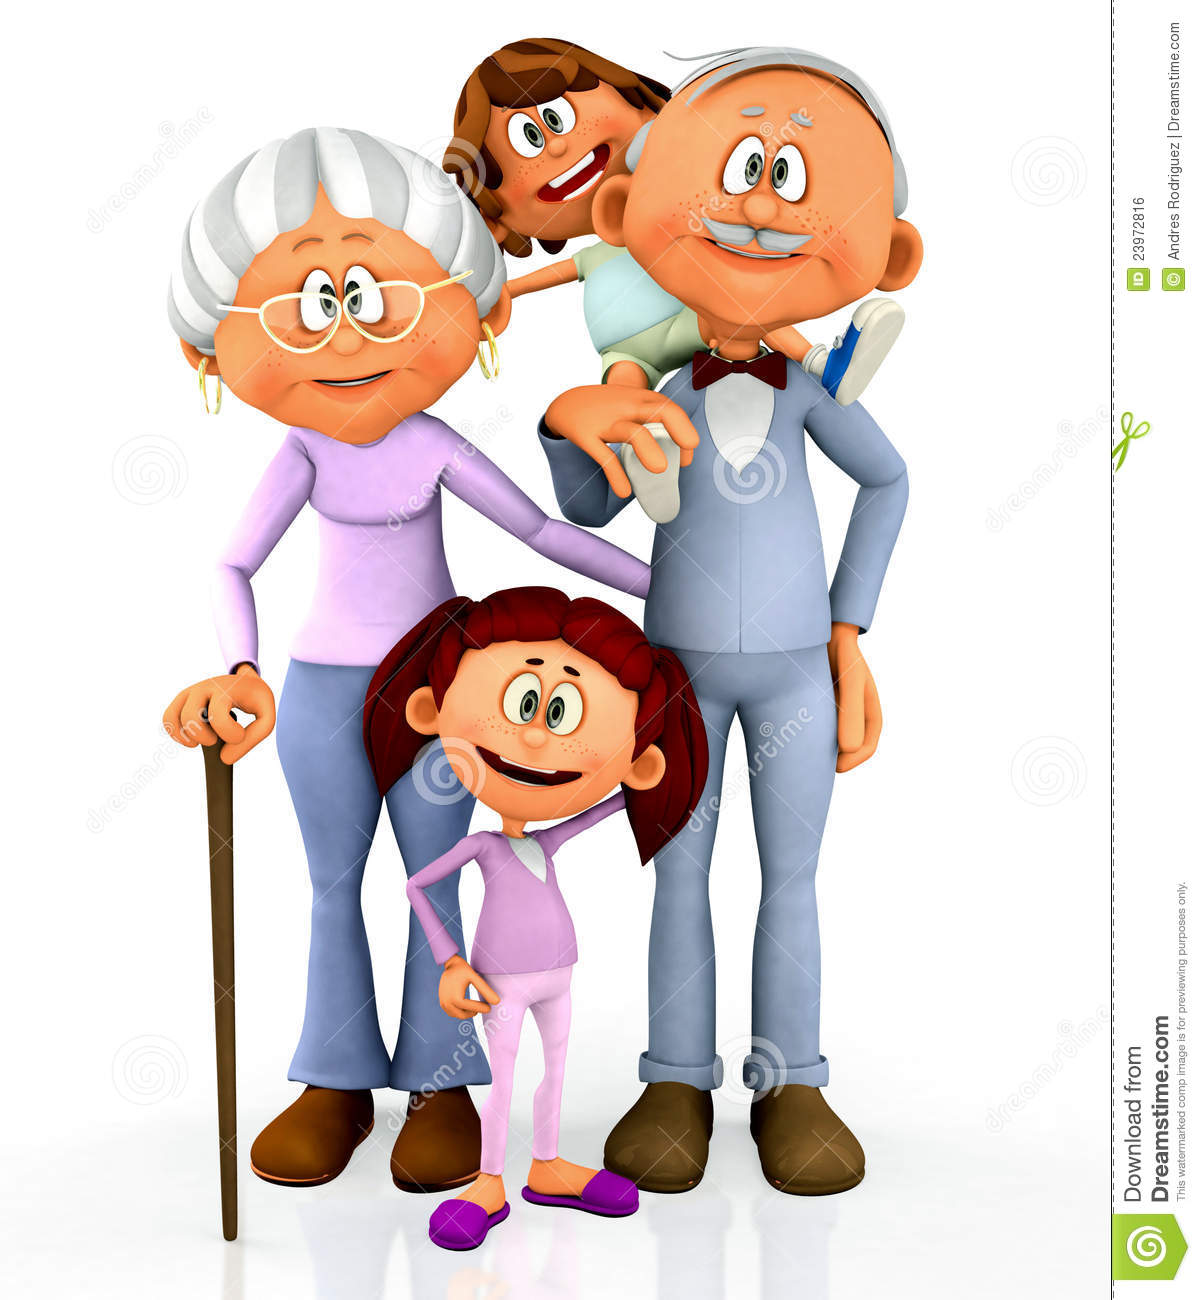 3d Kids With Grandparents Royalty Free Stock Image   Image  23972816